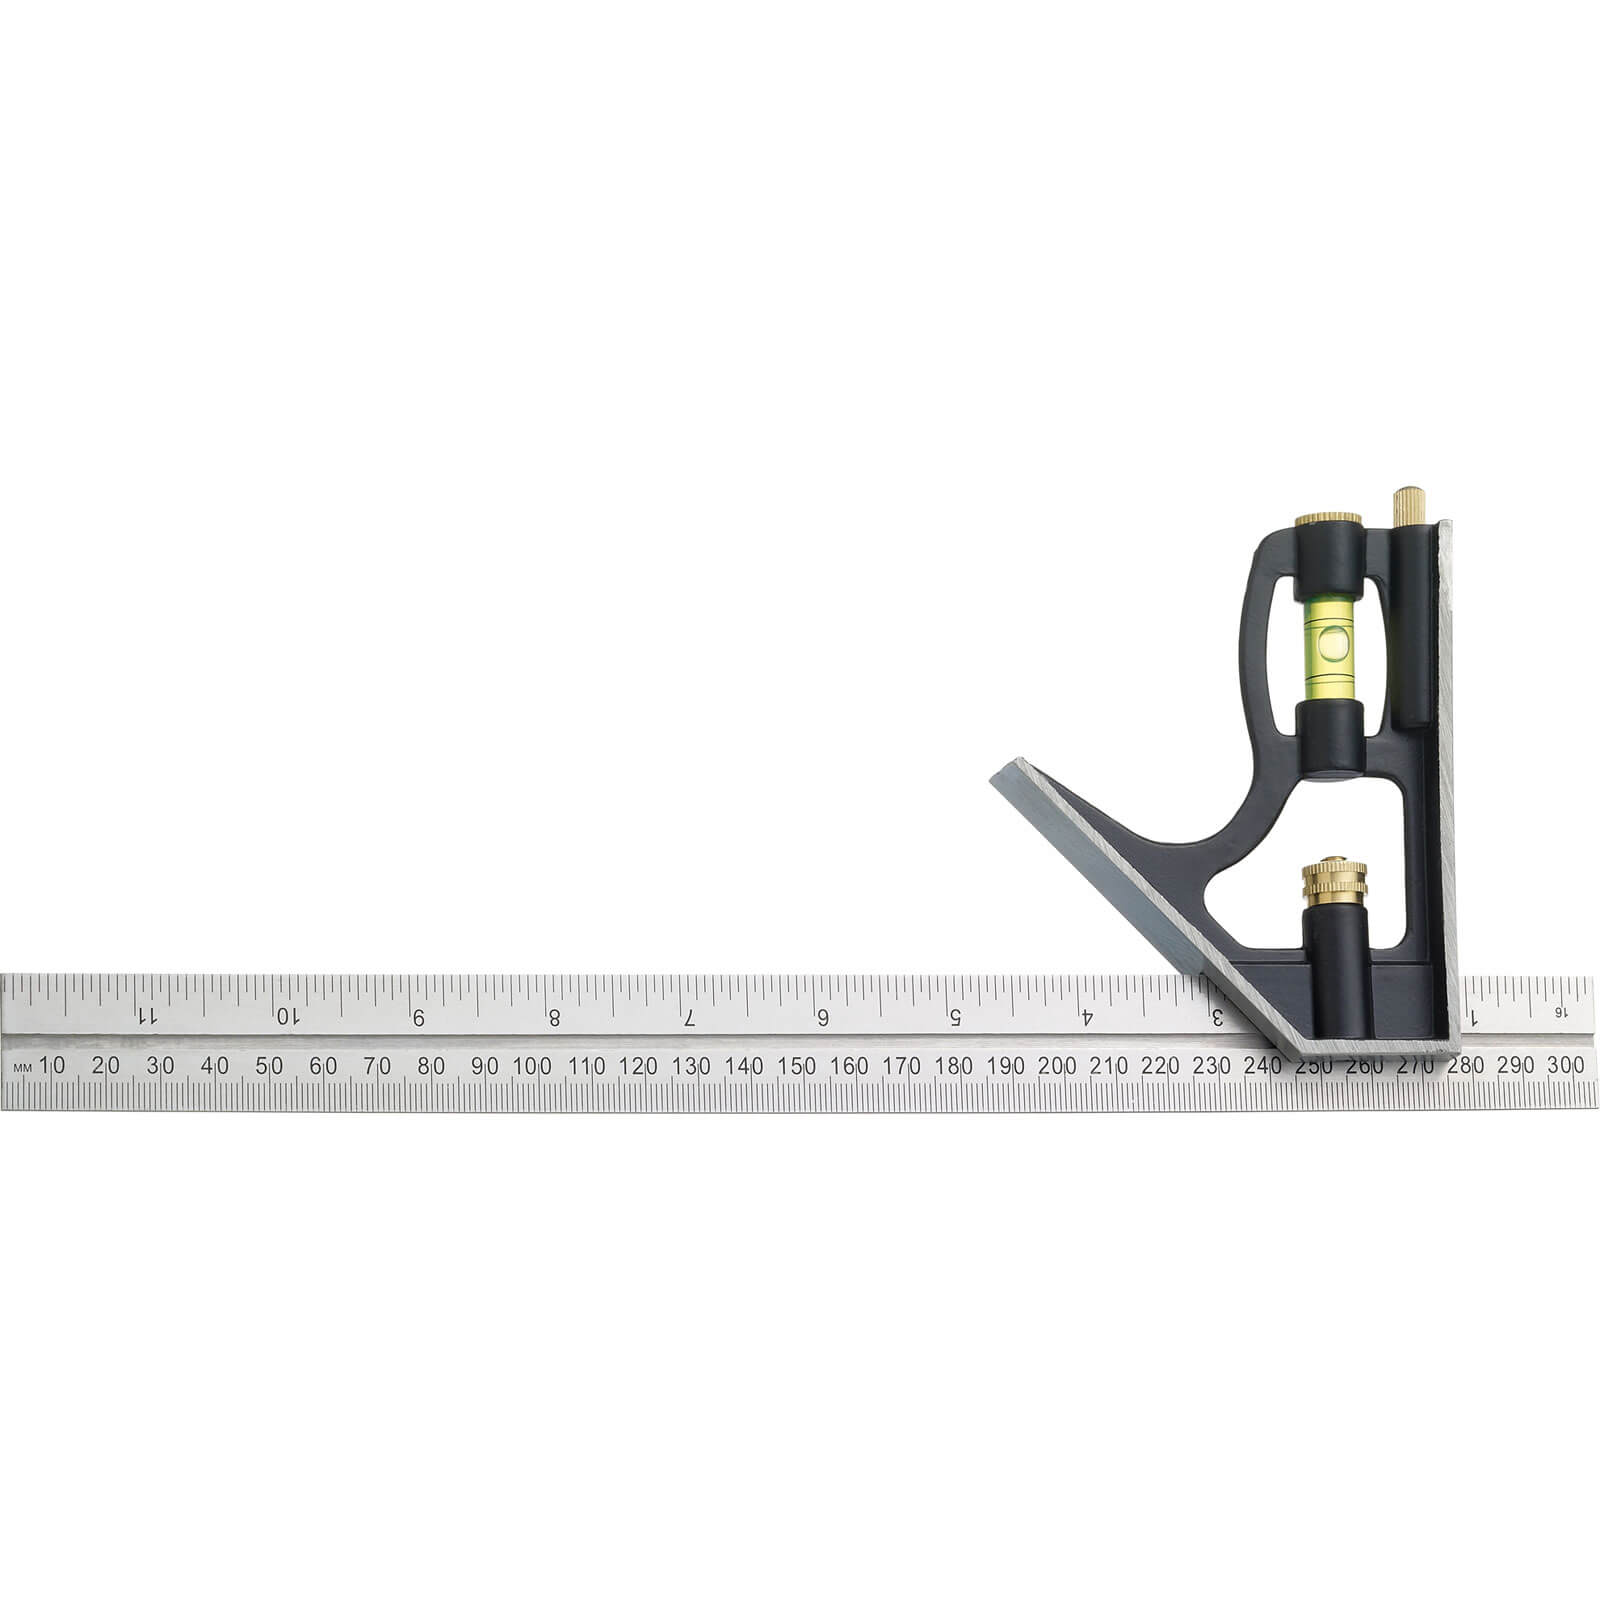 Fisher Fb22Me Combination Square 12" Blister